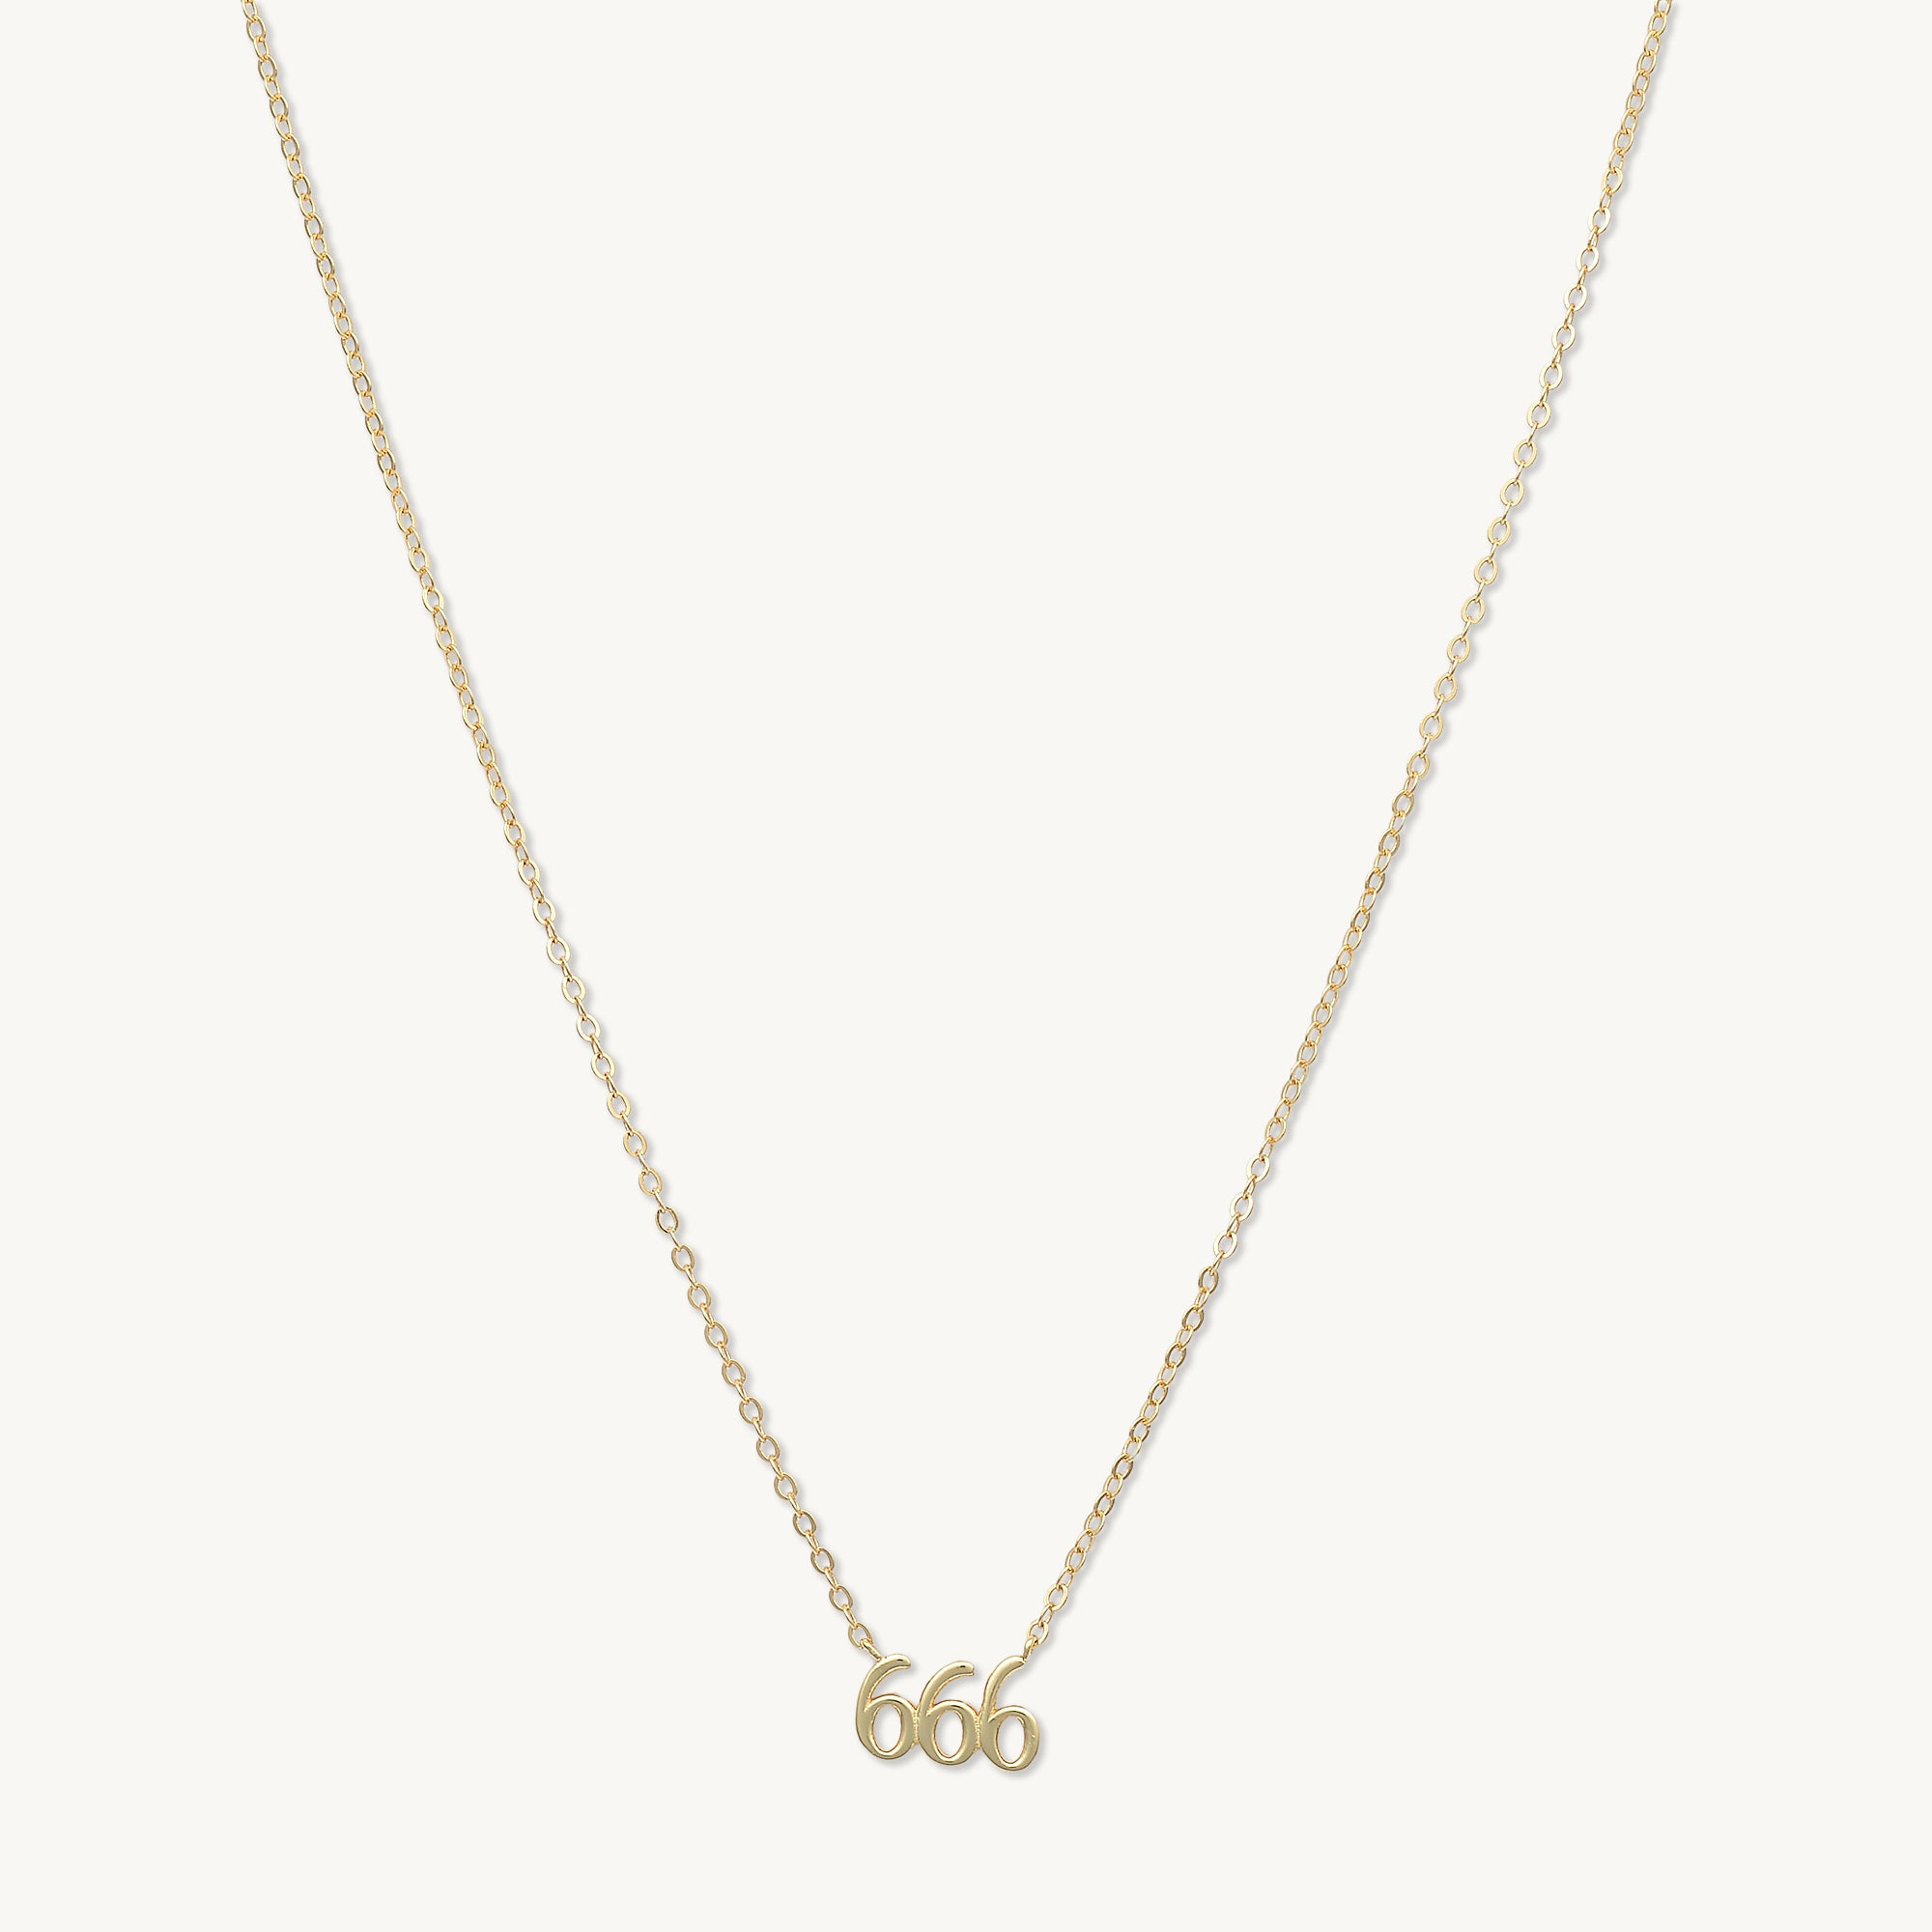 666 Angel Number Pendant Necklace